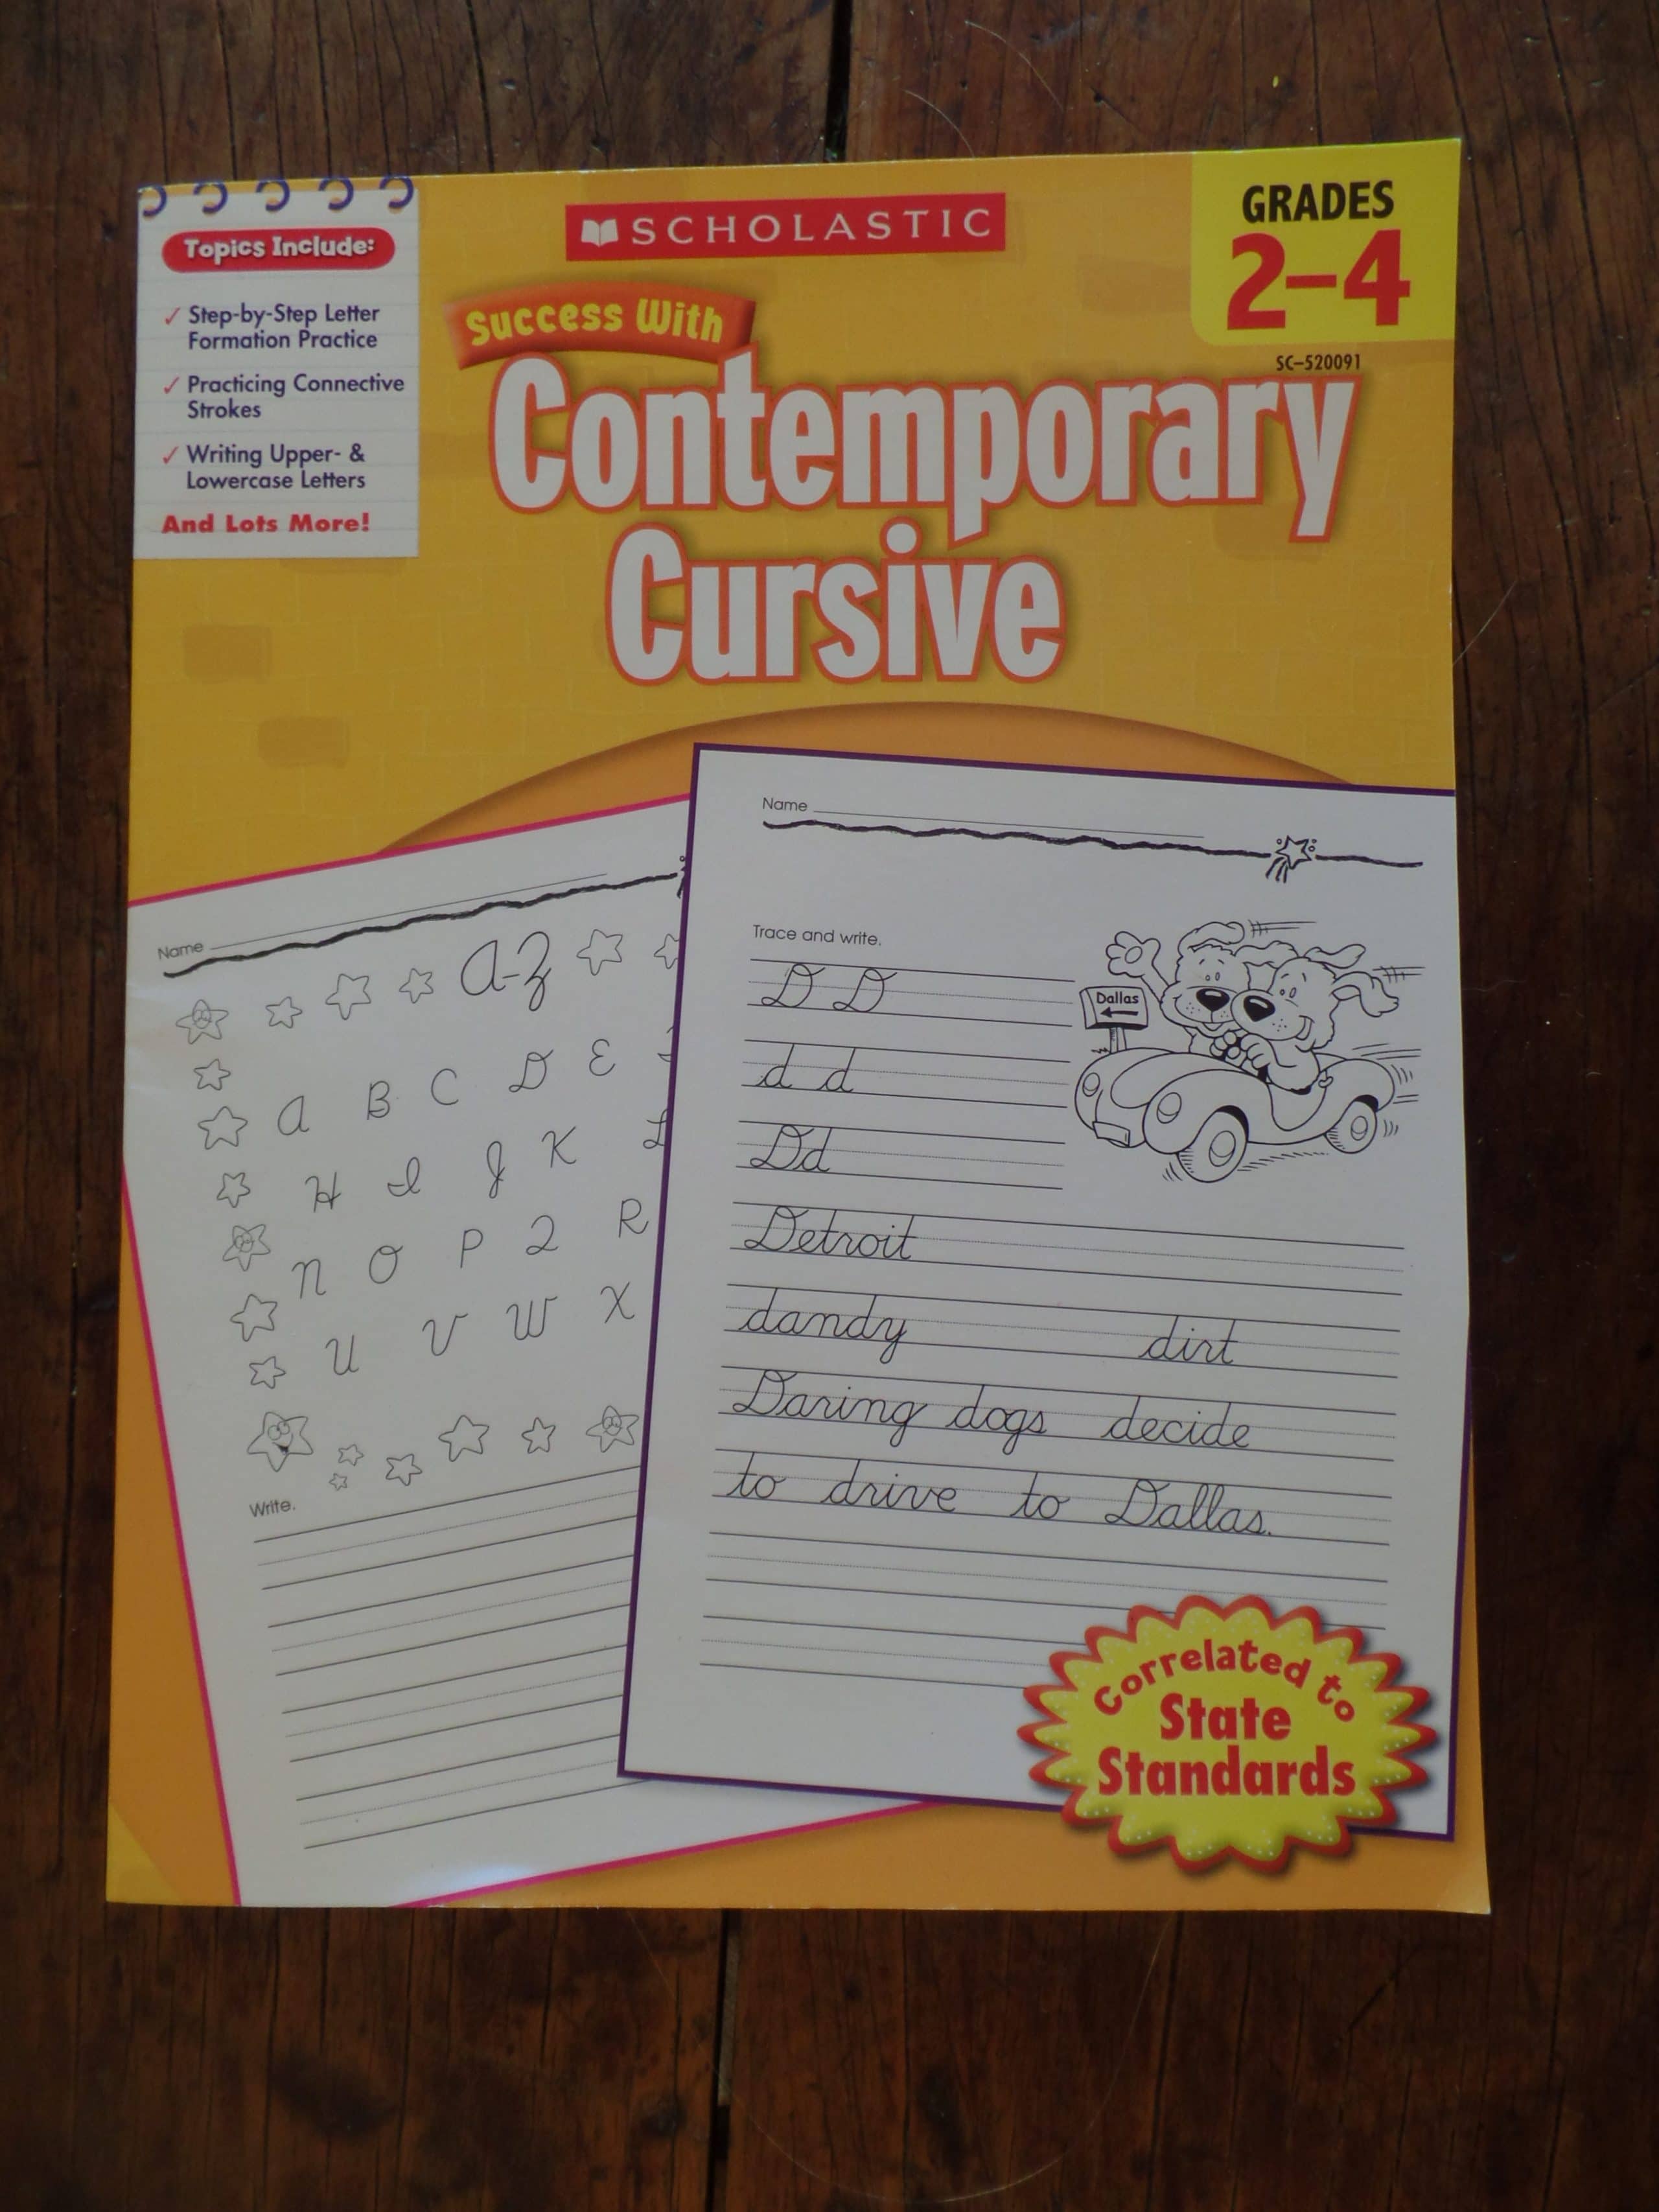 Cursive Handwriting Resources for Elementary